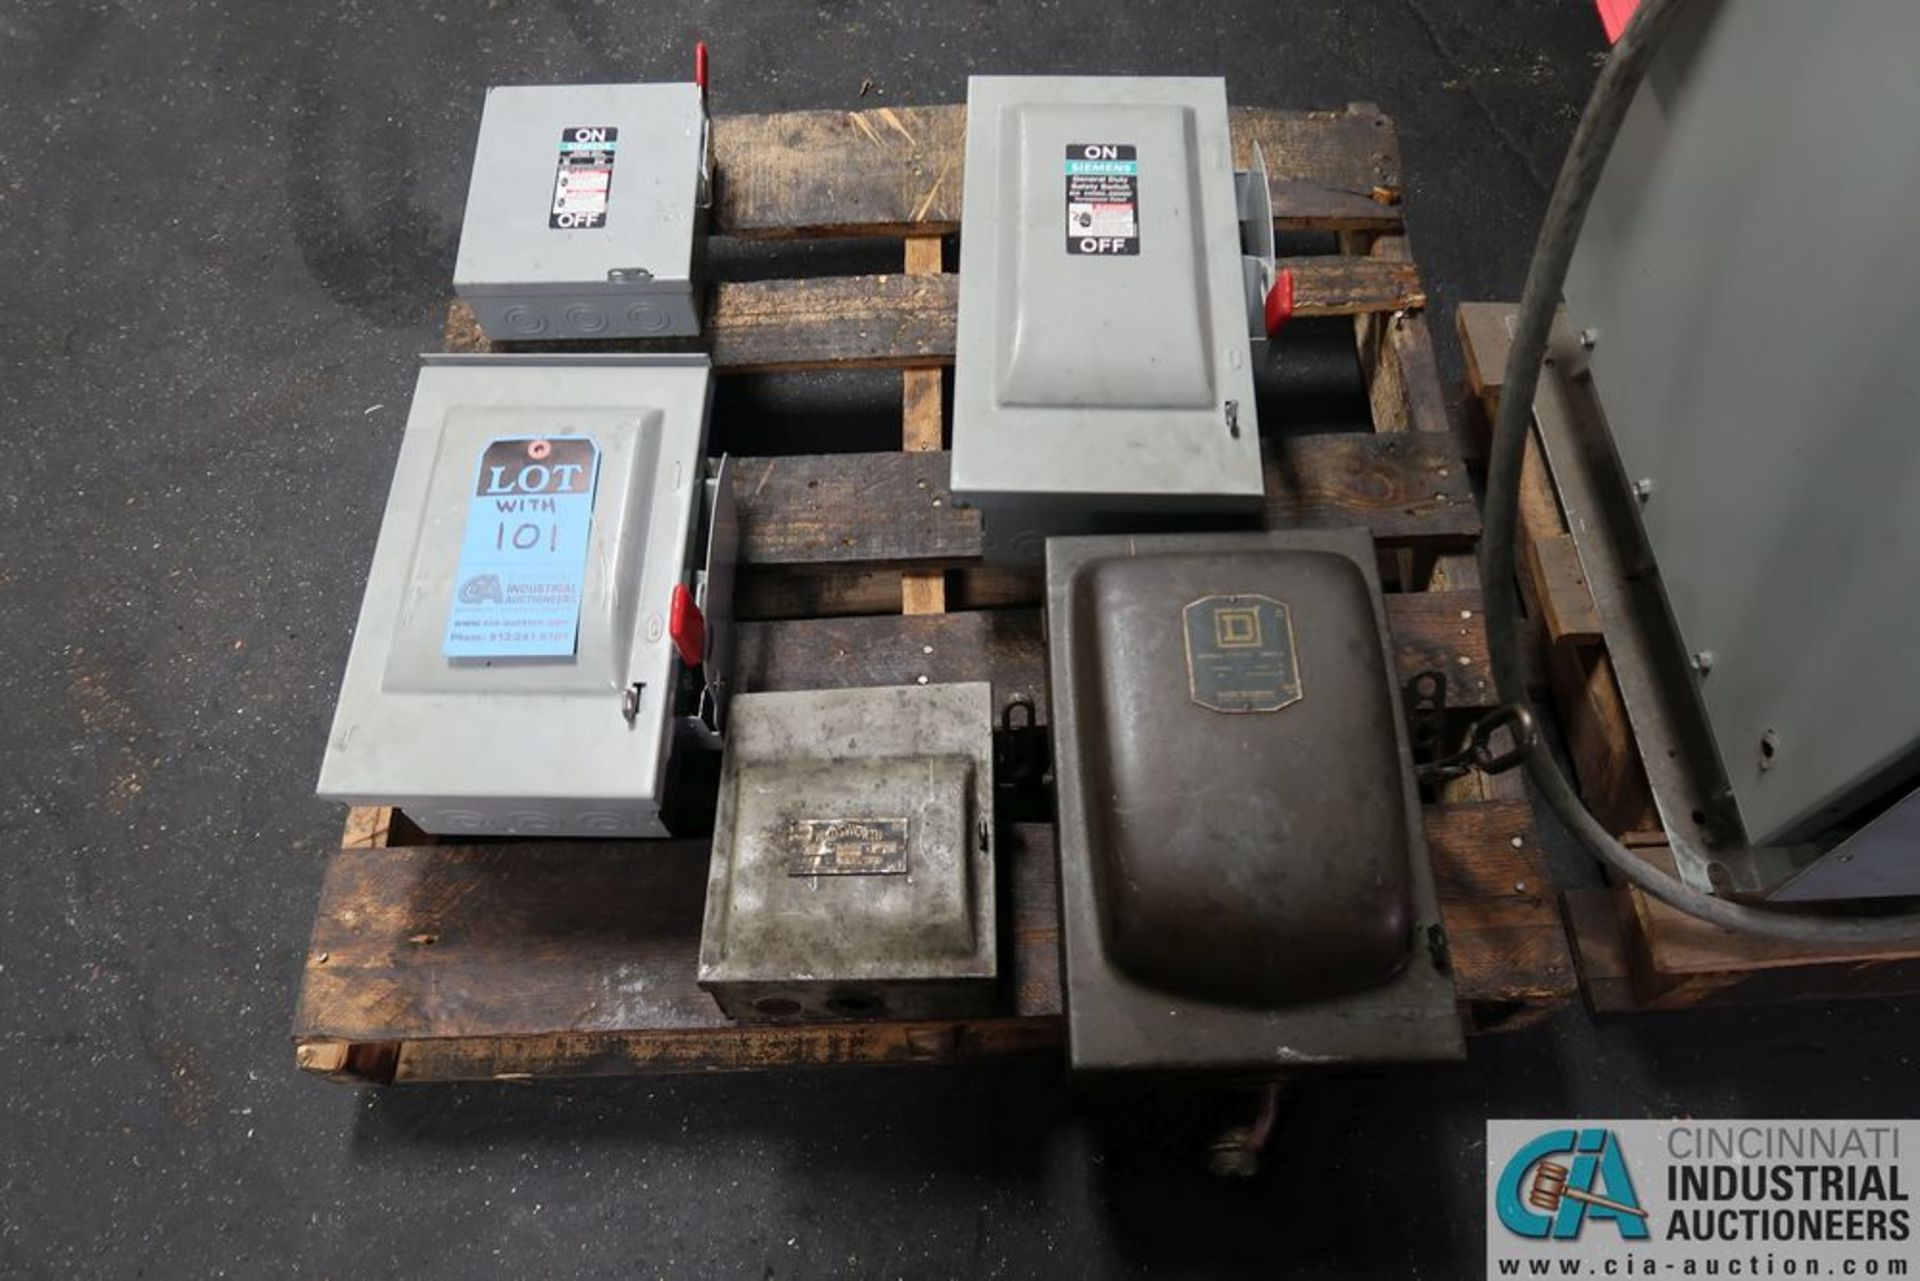 30-KVA ACME TRANSFORMER CO. GENERAL PURPOSE TRANSFORMER W/ (1) SKID SAFETY SWITCHES - Image 2 of 2